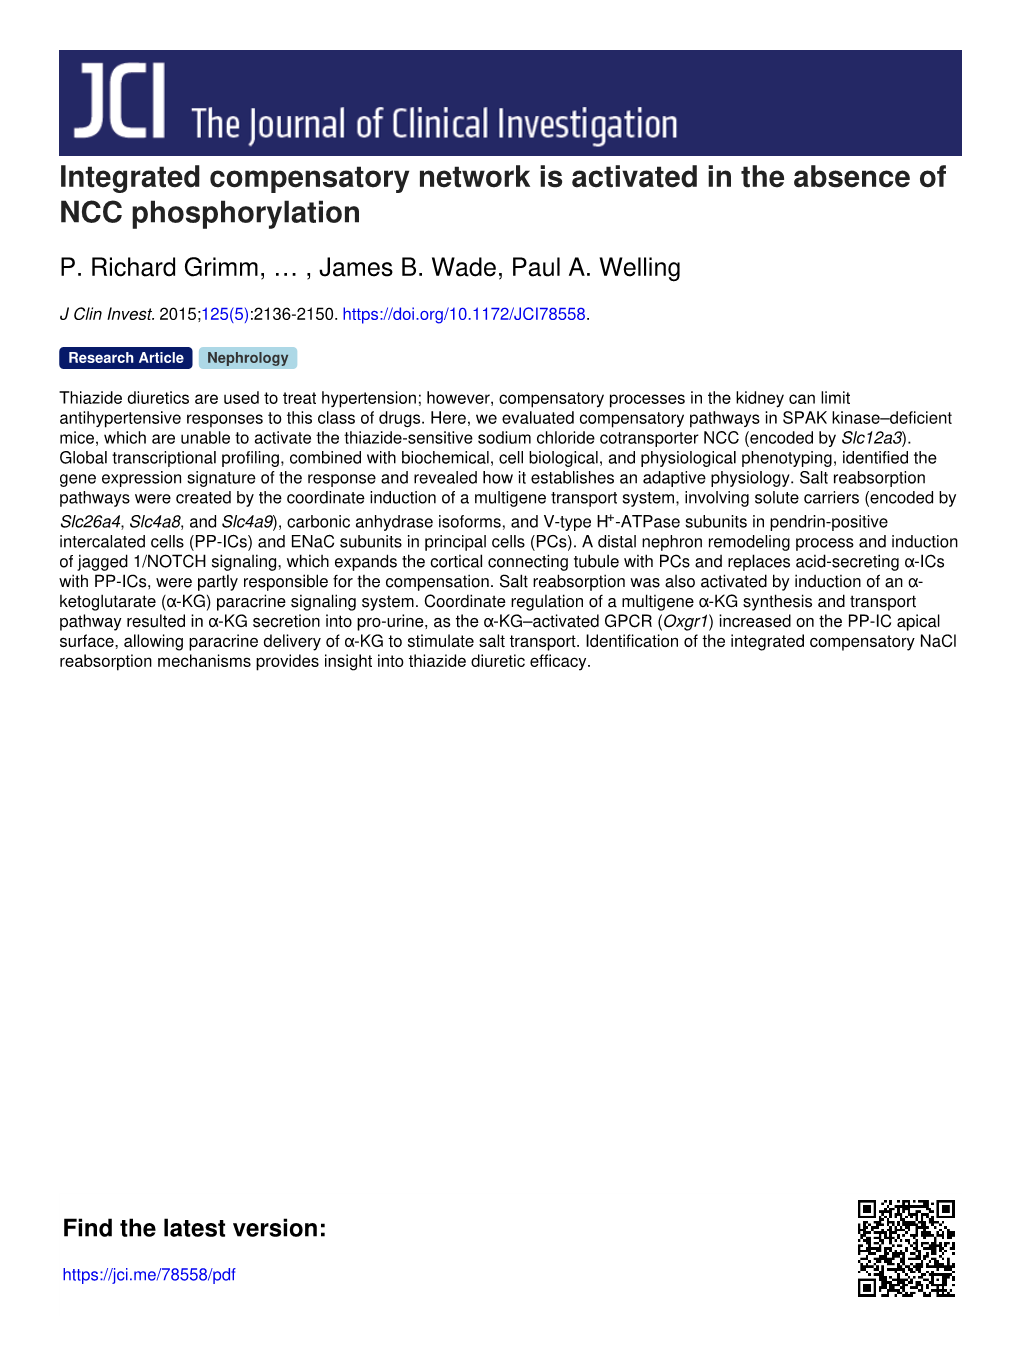 Integrated Compensatory Network Is Activated in the Absence of NCC Phosphorylation